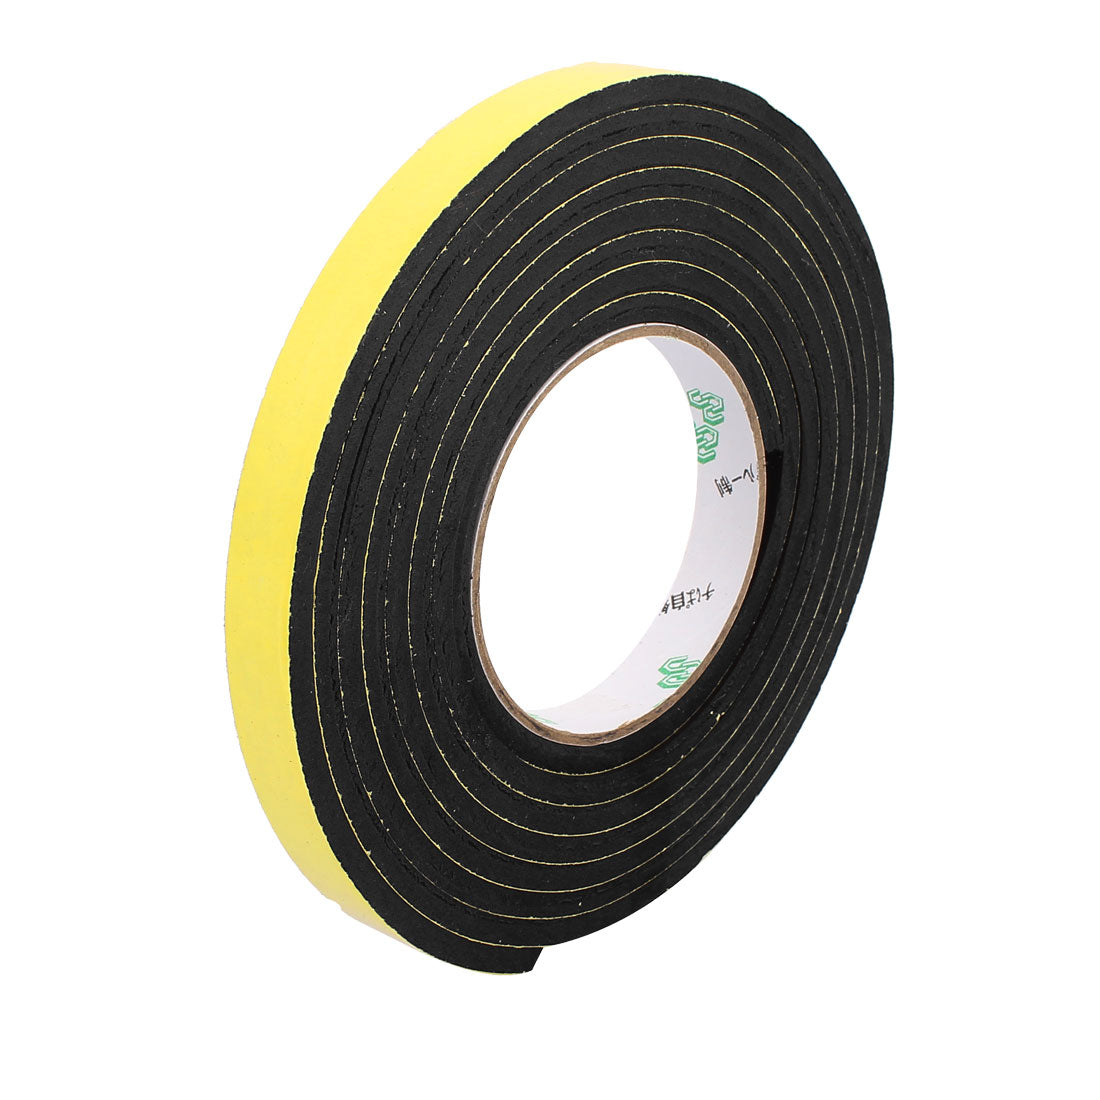 uxcell Uxcell 15mm x 5mm Single Sided Self Adhesive Shockproof Sponge Foam Tape 3 Meters